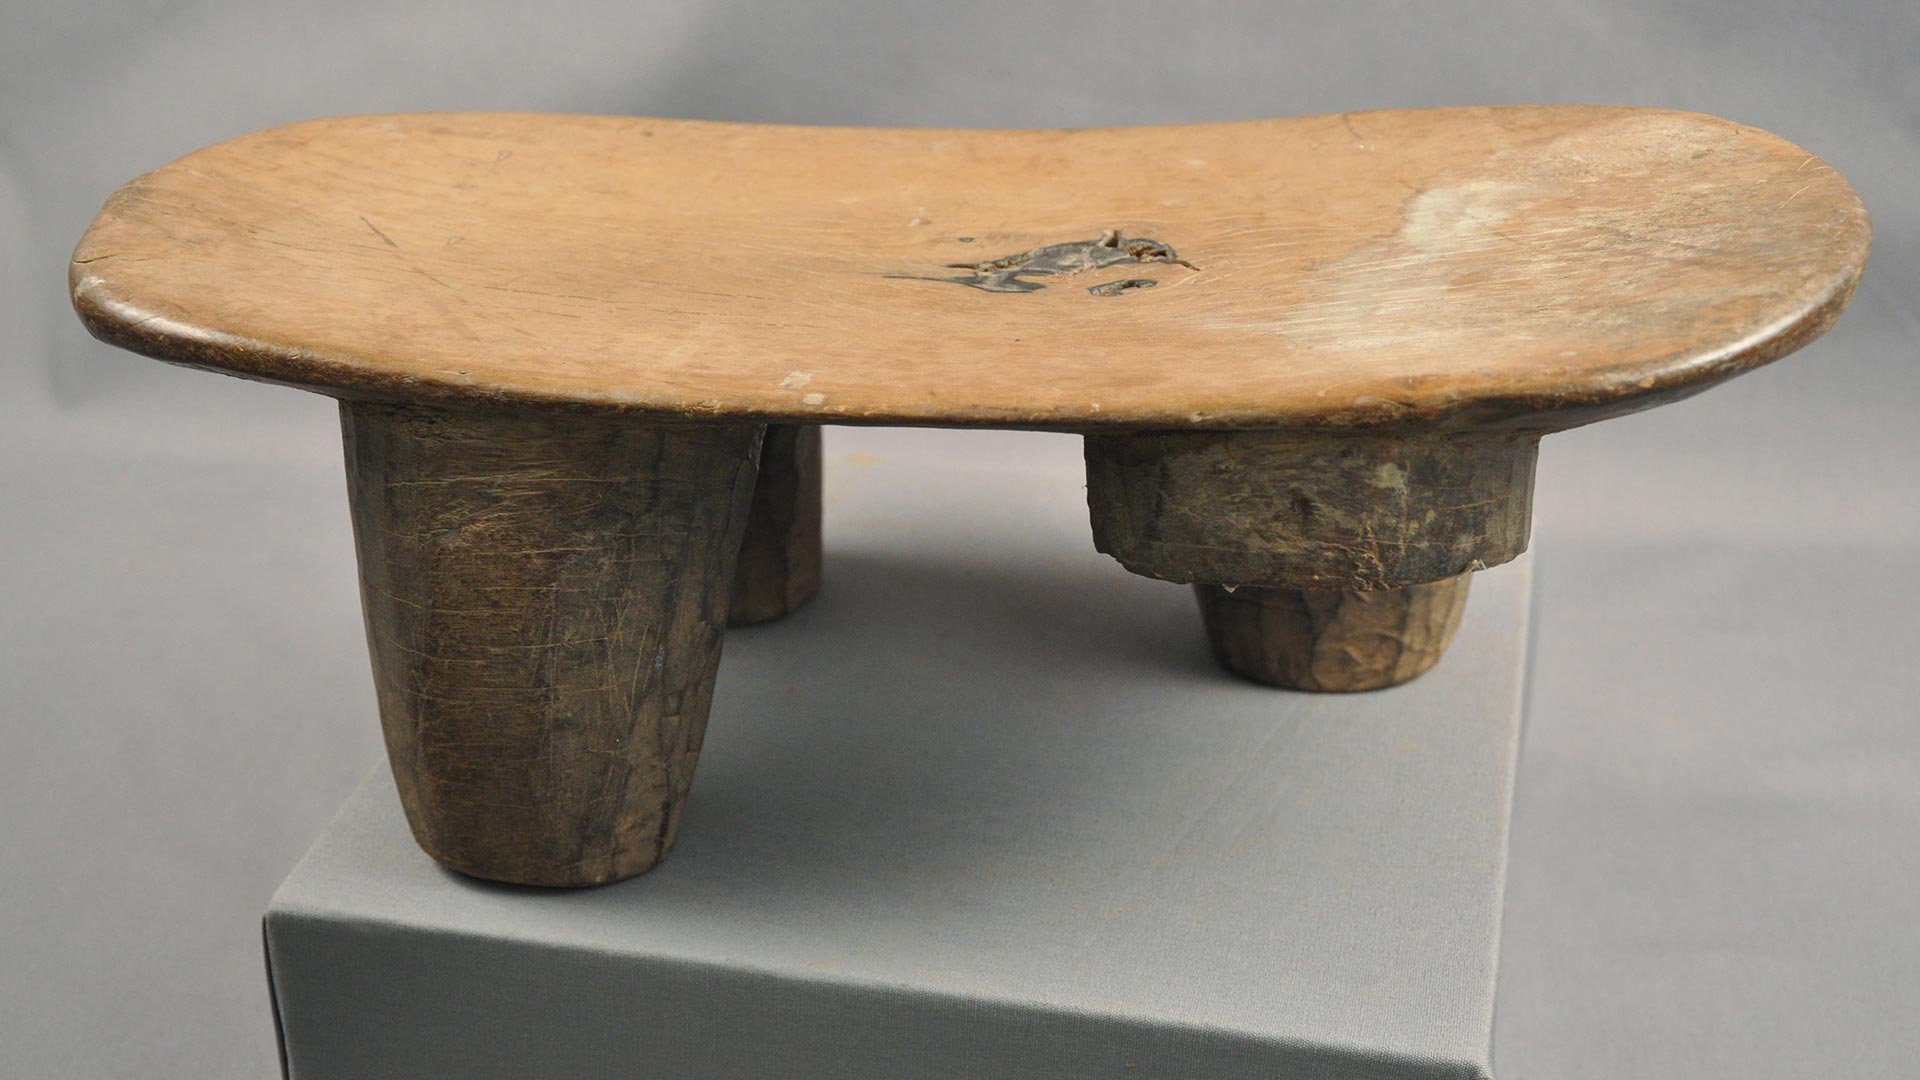 flat short wooden stool with three plain legs and a part of a fourth, broken leg